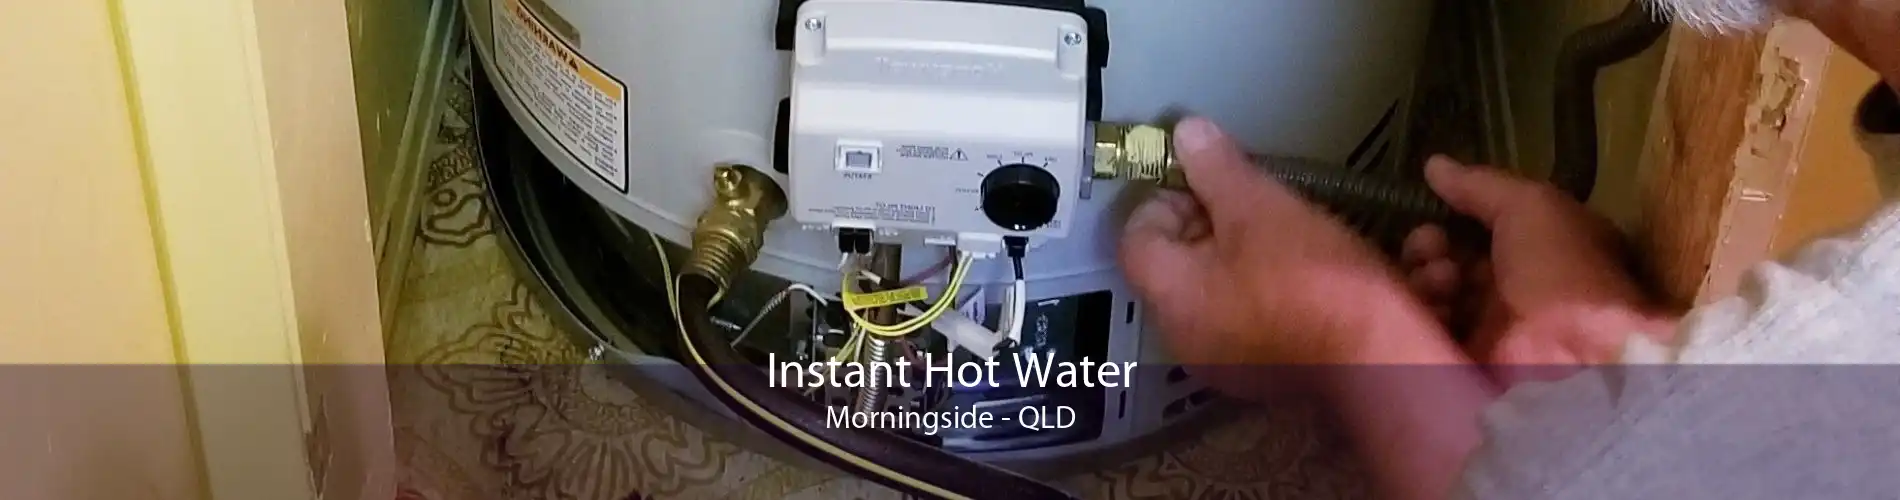 Instant Hot Water Morningside - QLD